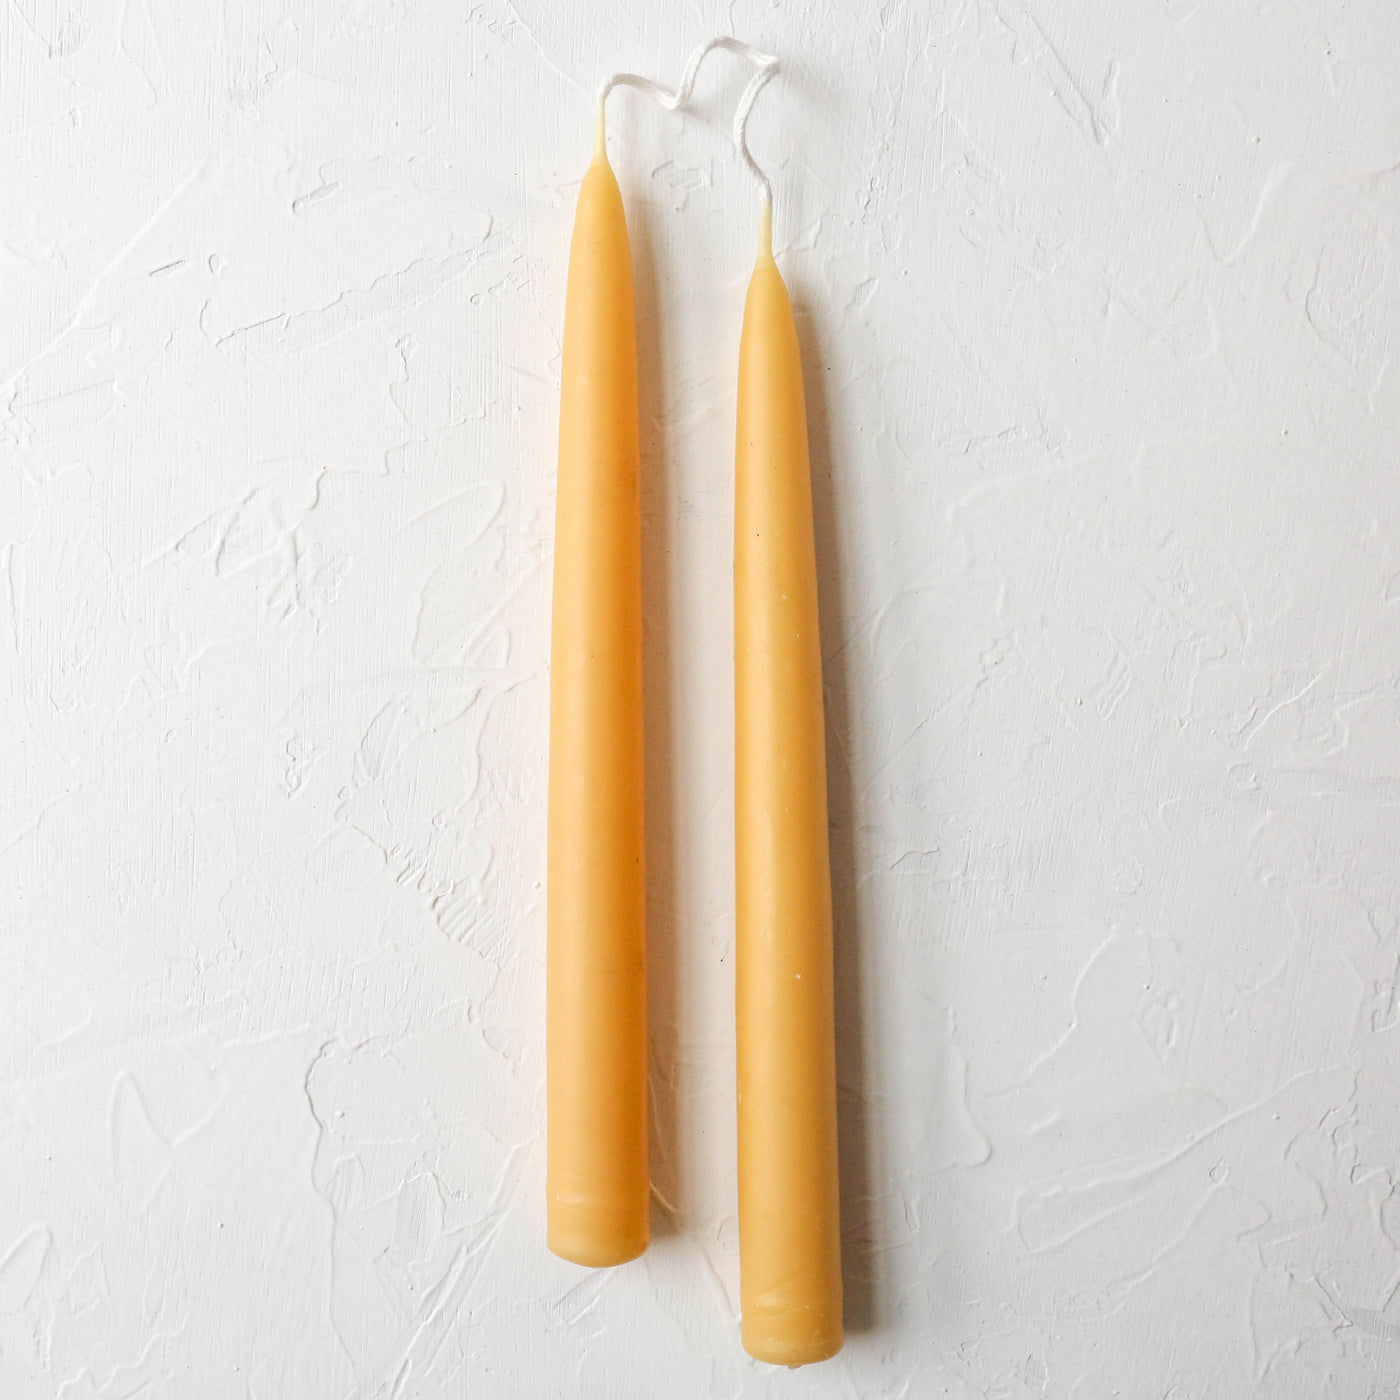 23cm Hand Dipped Beeswax Candles - Pair